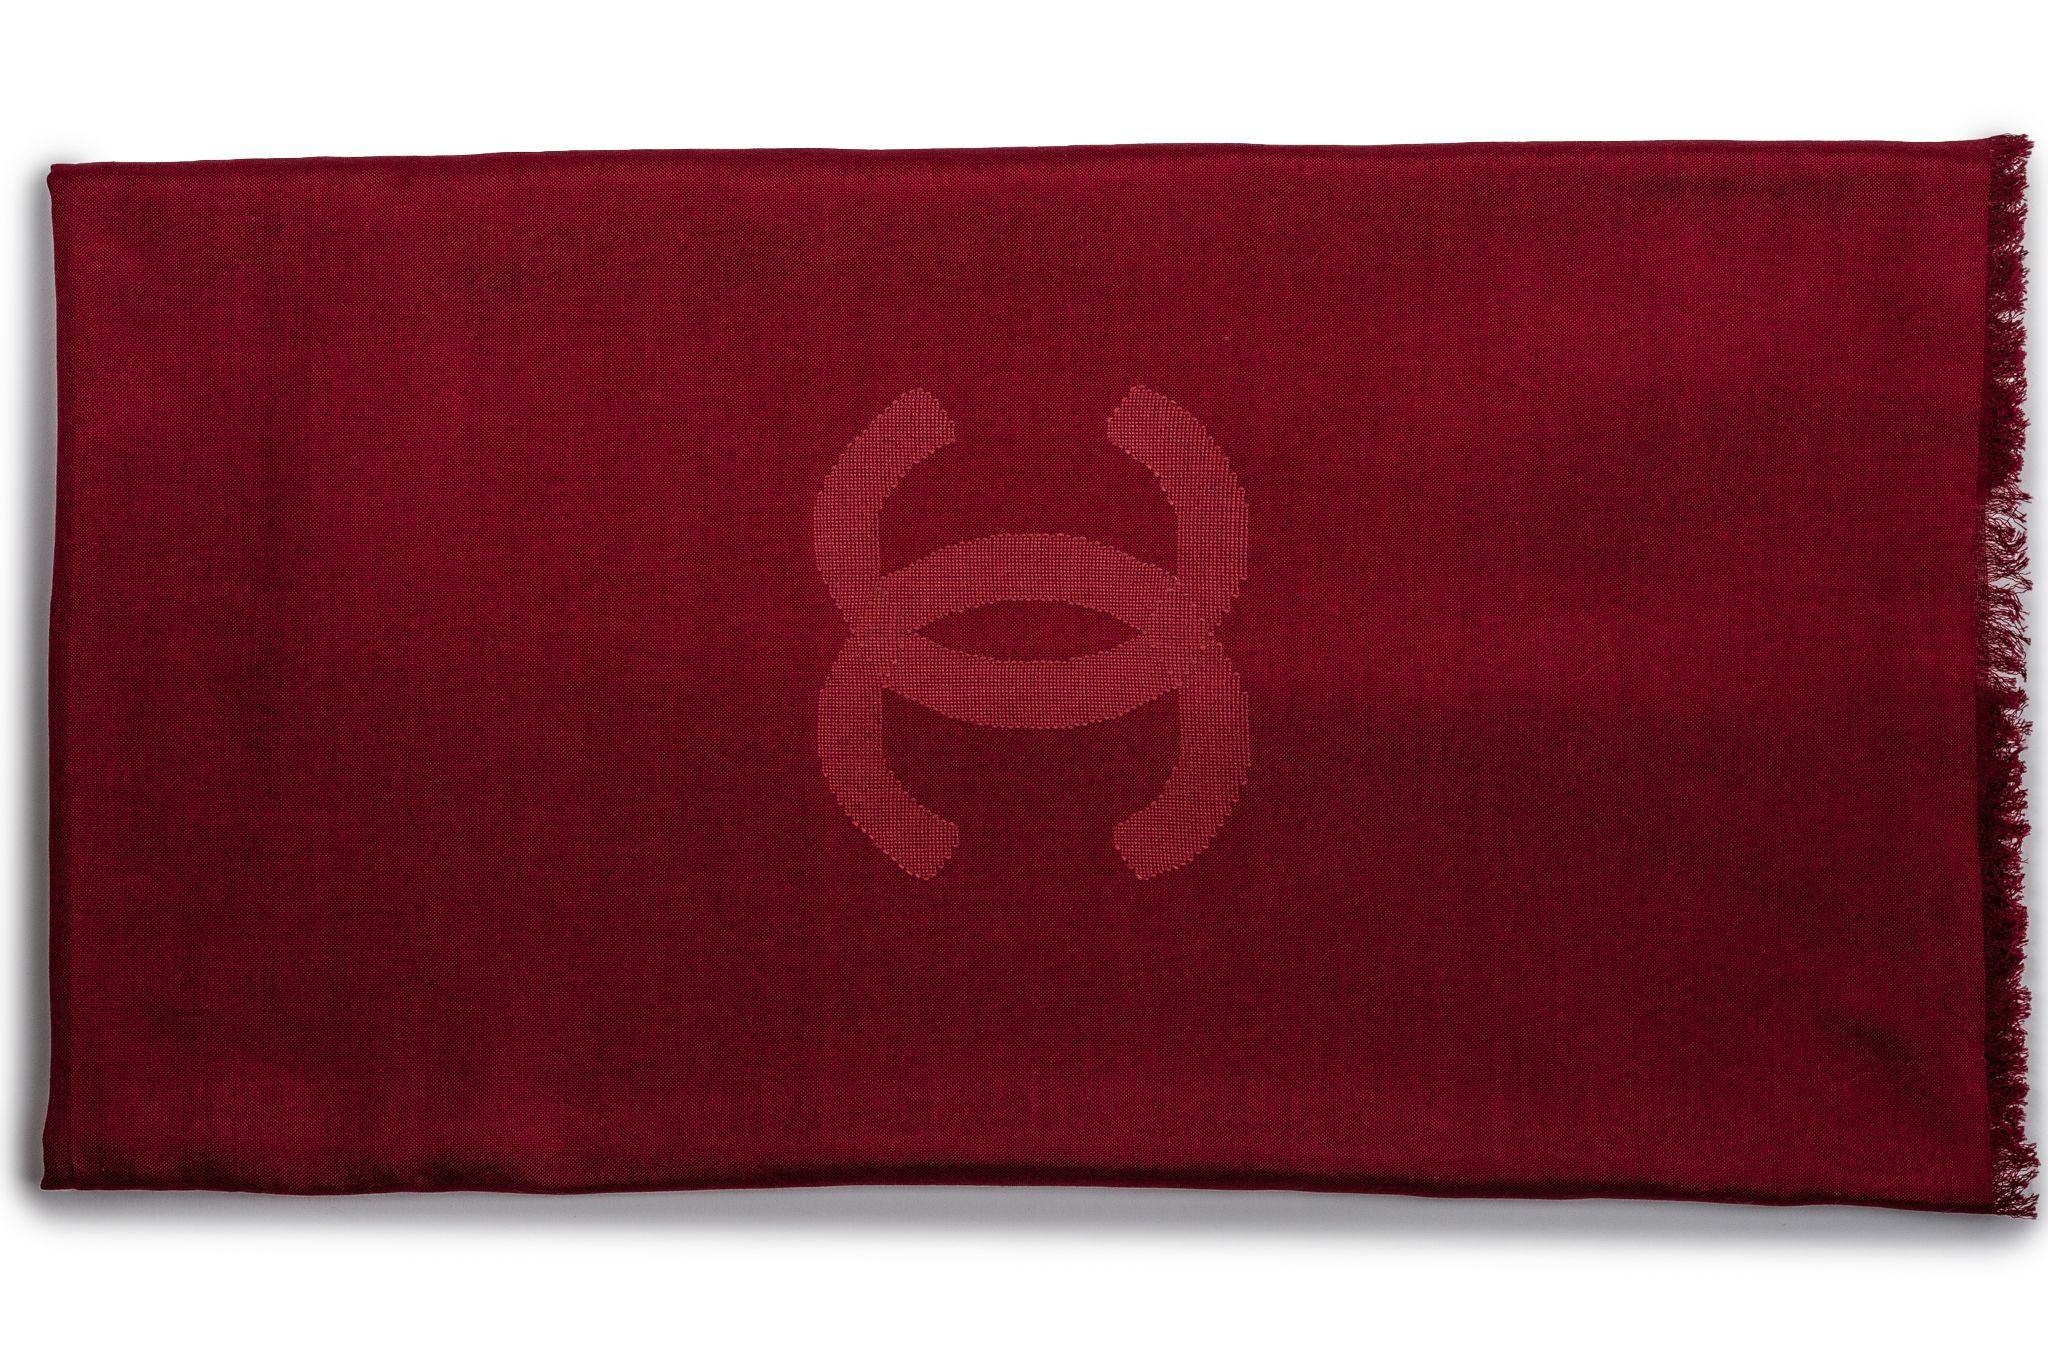 Chanel Cashmere Shawl in red. The pattern features several CC logos. The item is in new condition.